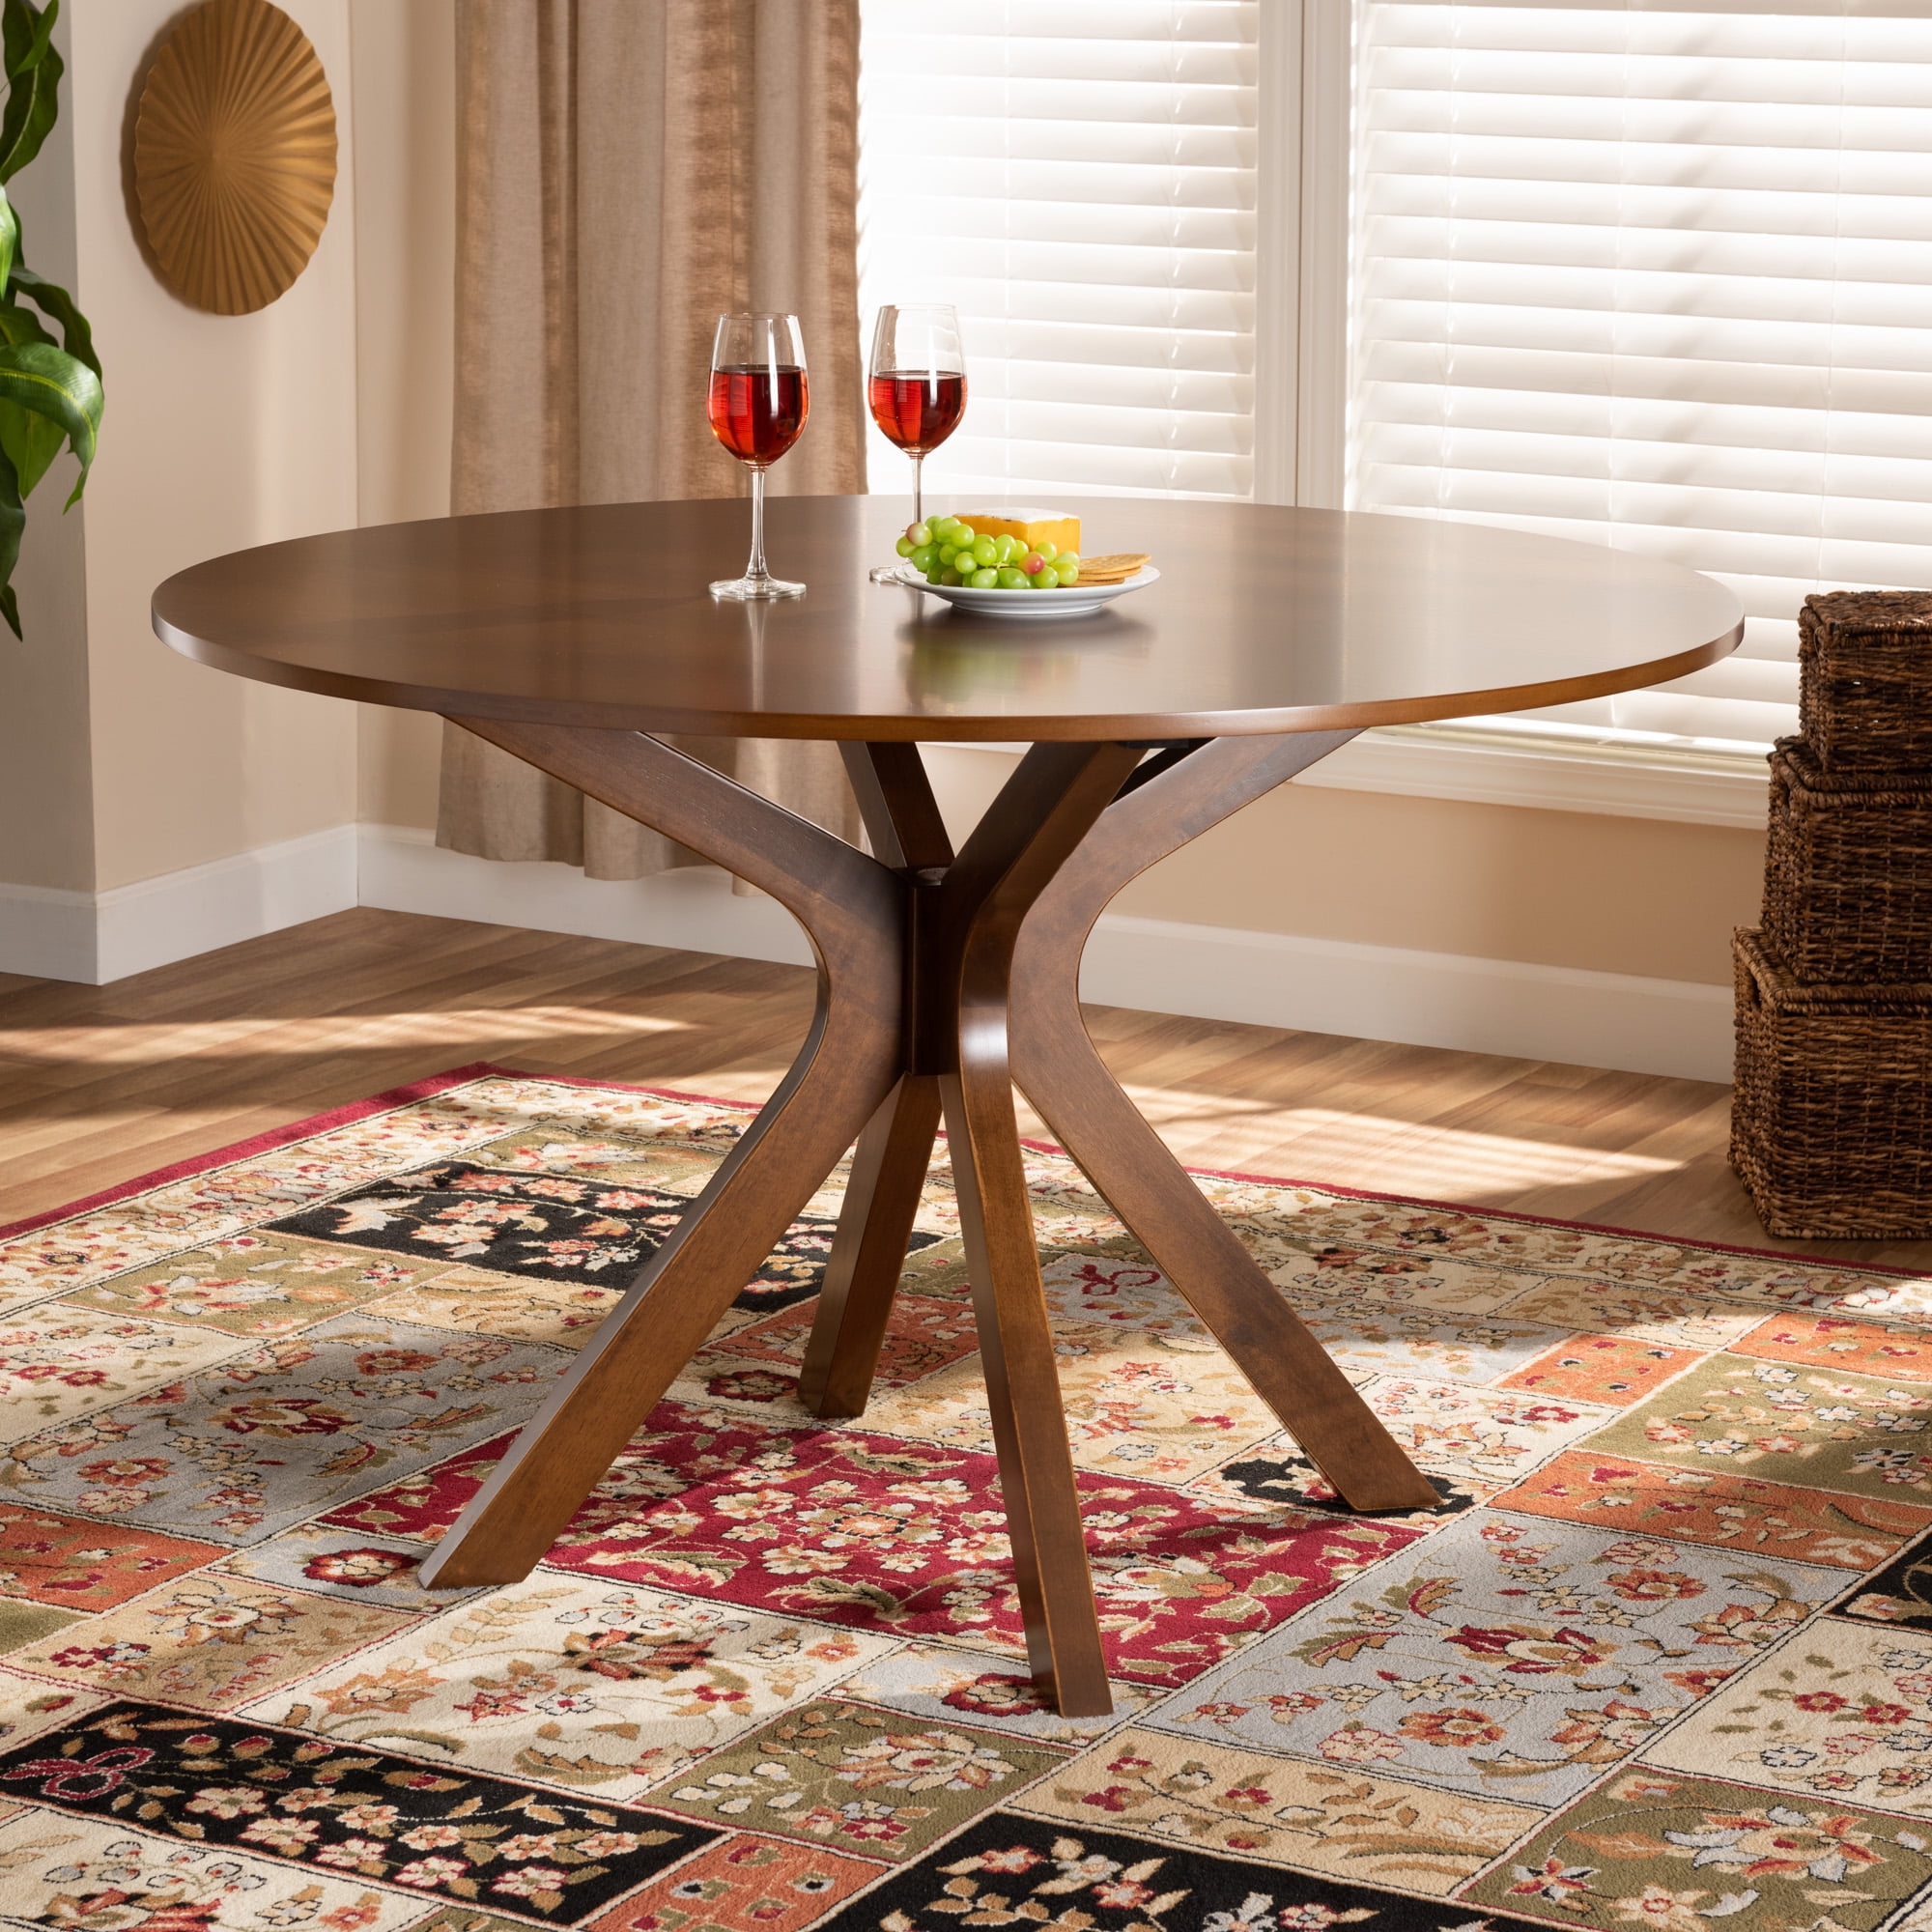 Wood And Metal Round Dining Table